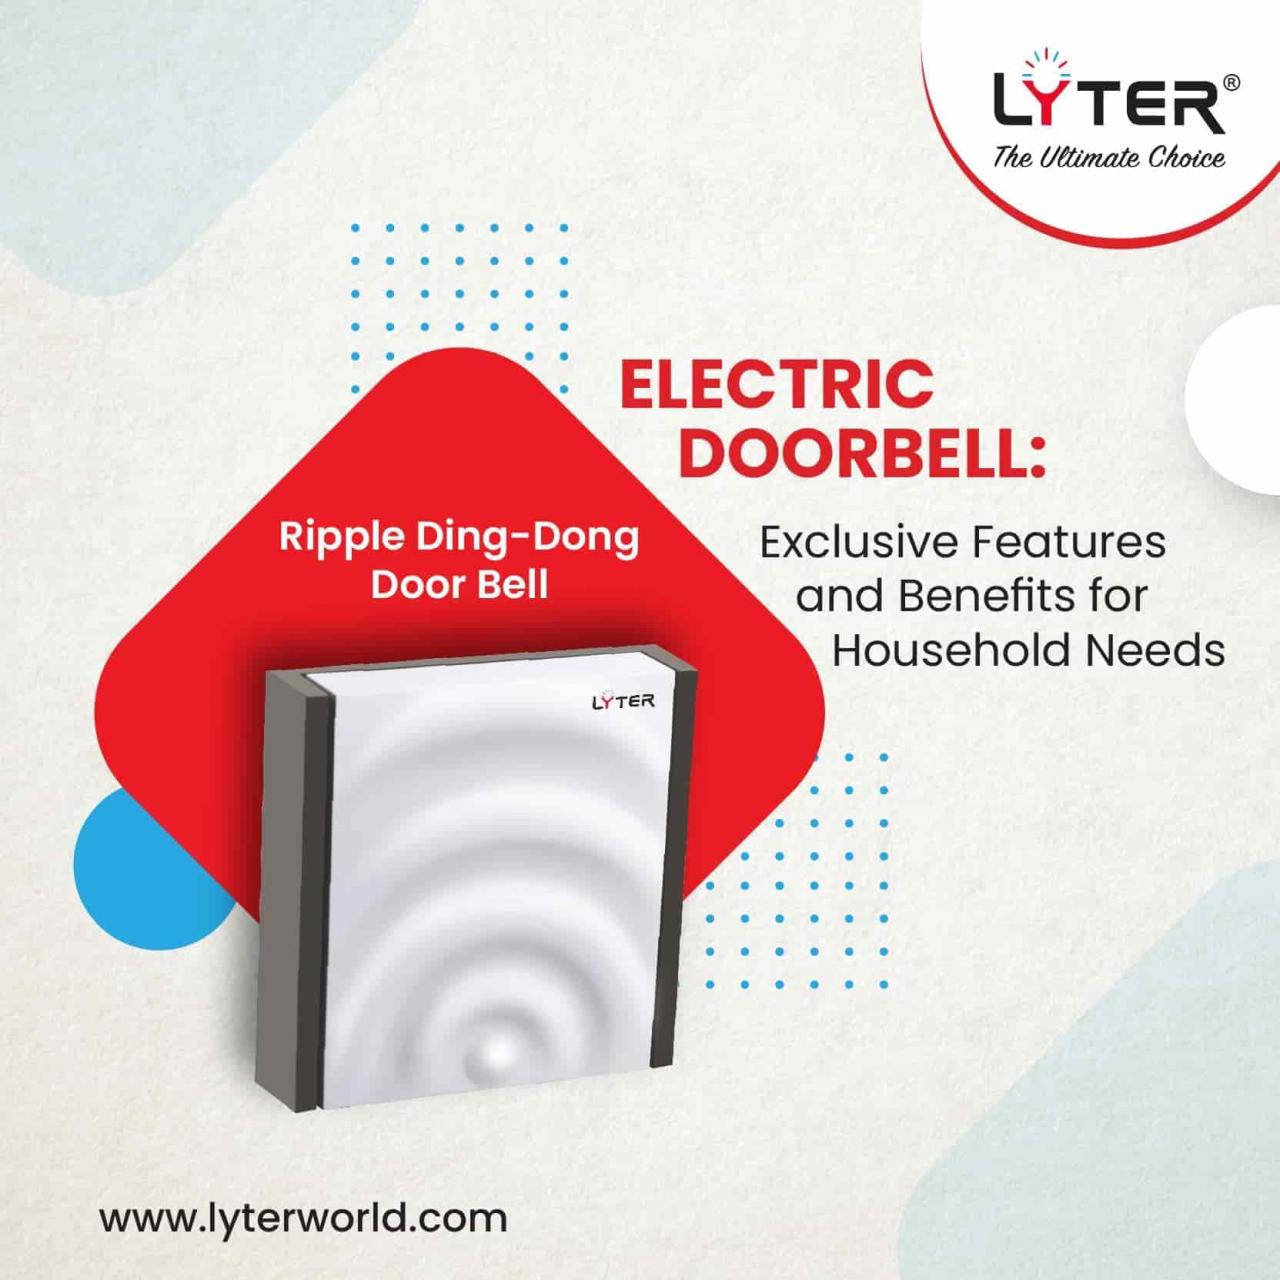 An electric doorbell requires 12 volts